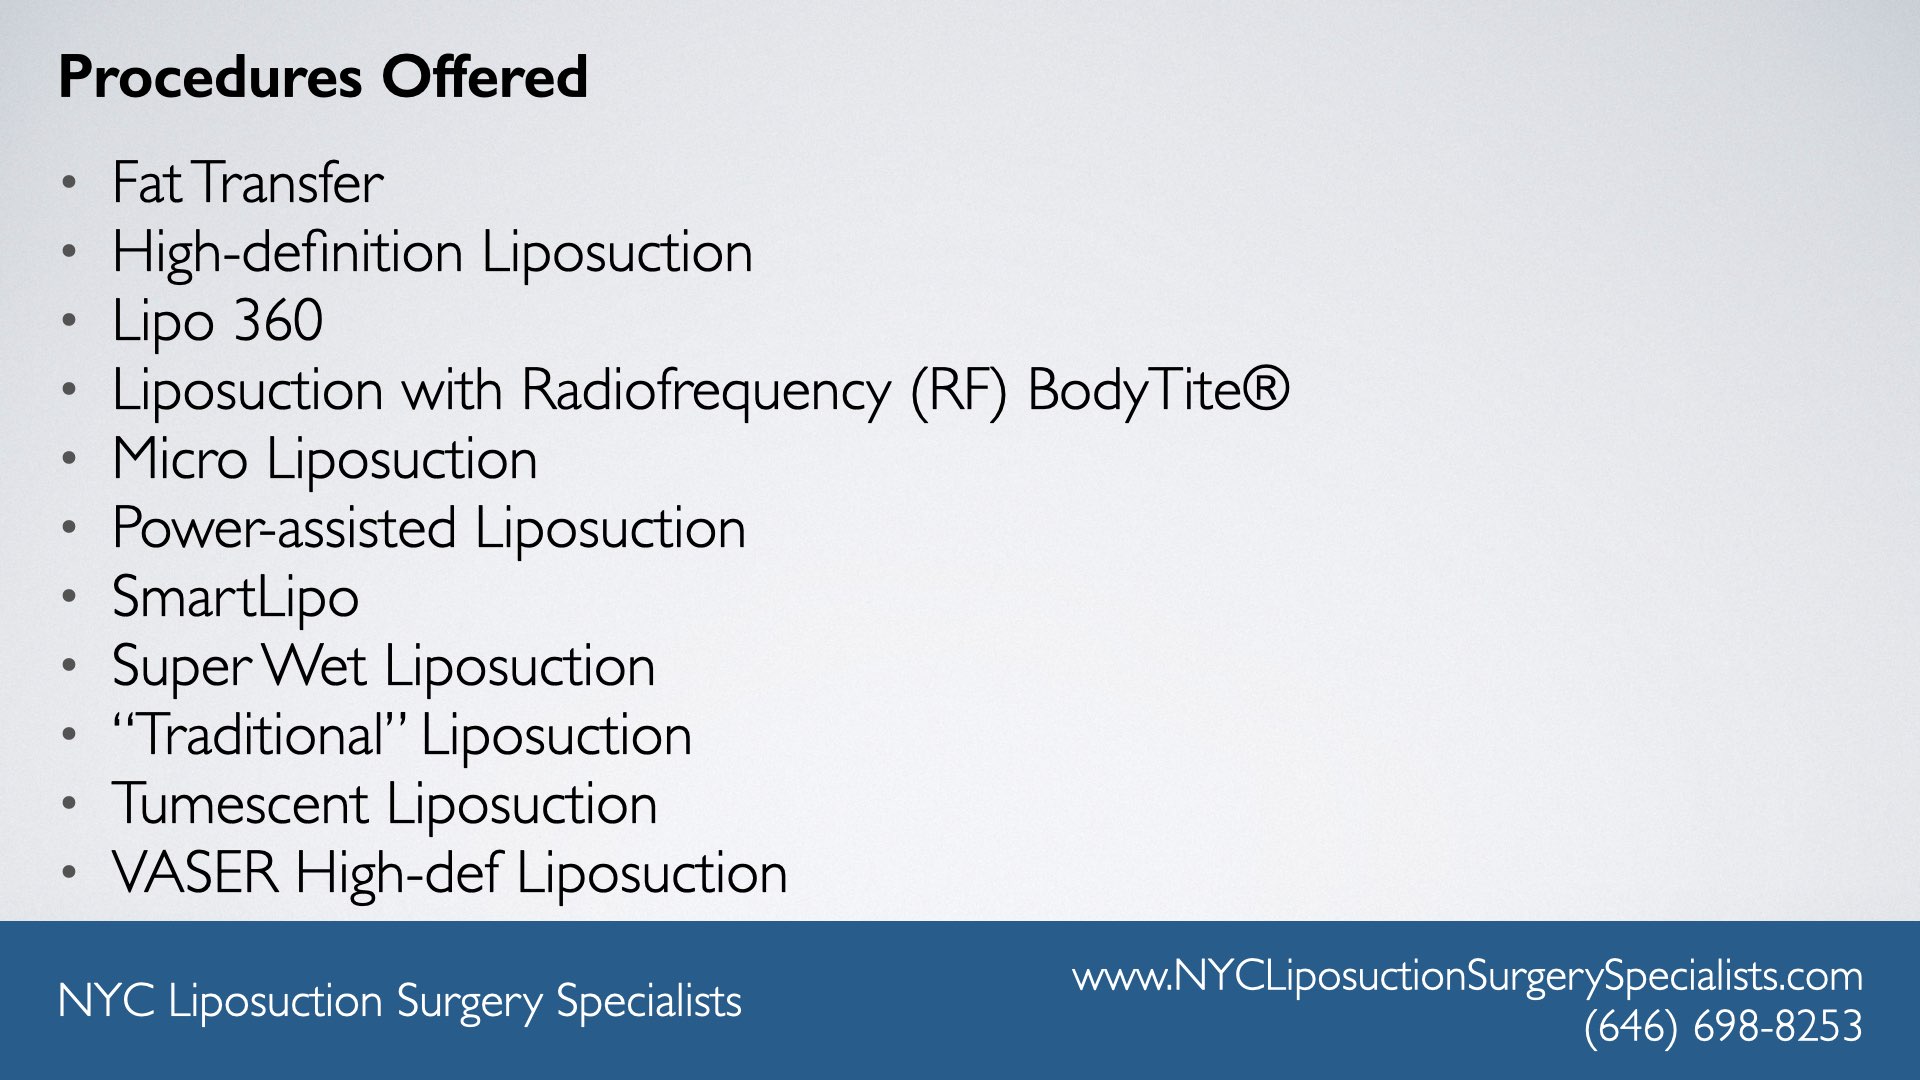 NYC Liposuction Surgery Specialists - Directory Datacaptive